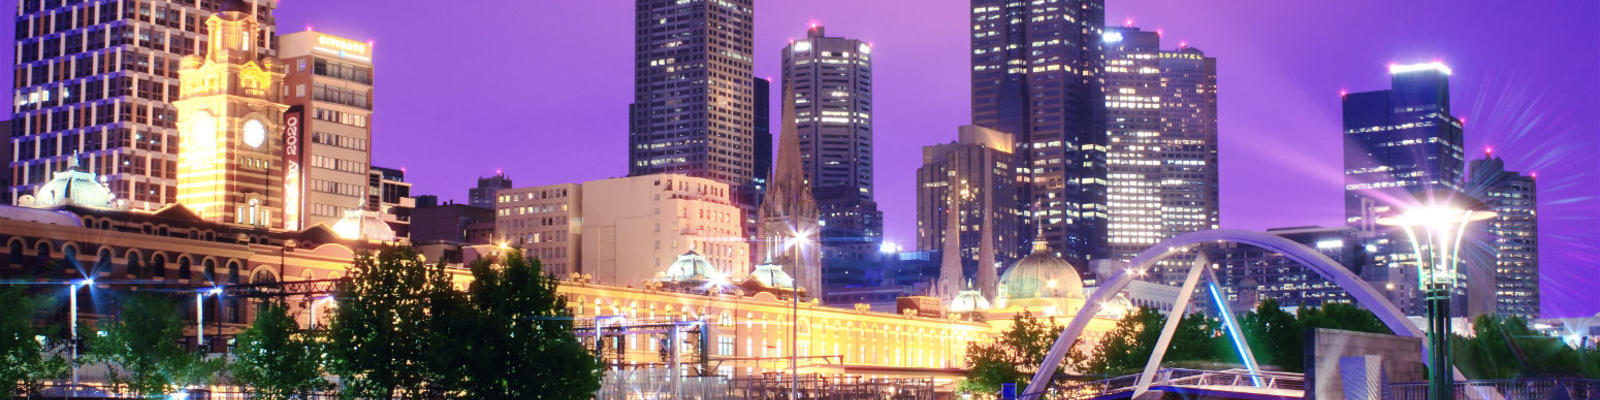 A view of Melbourne over the river at night